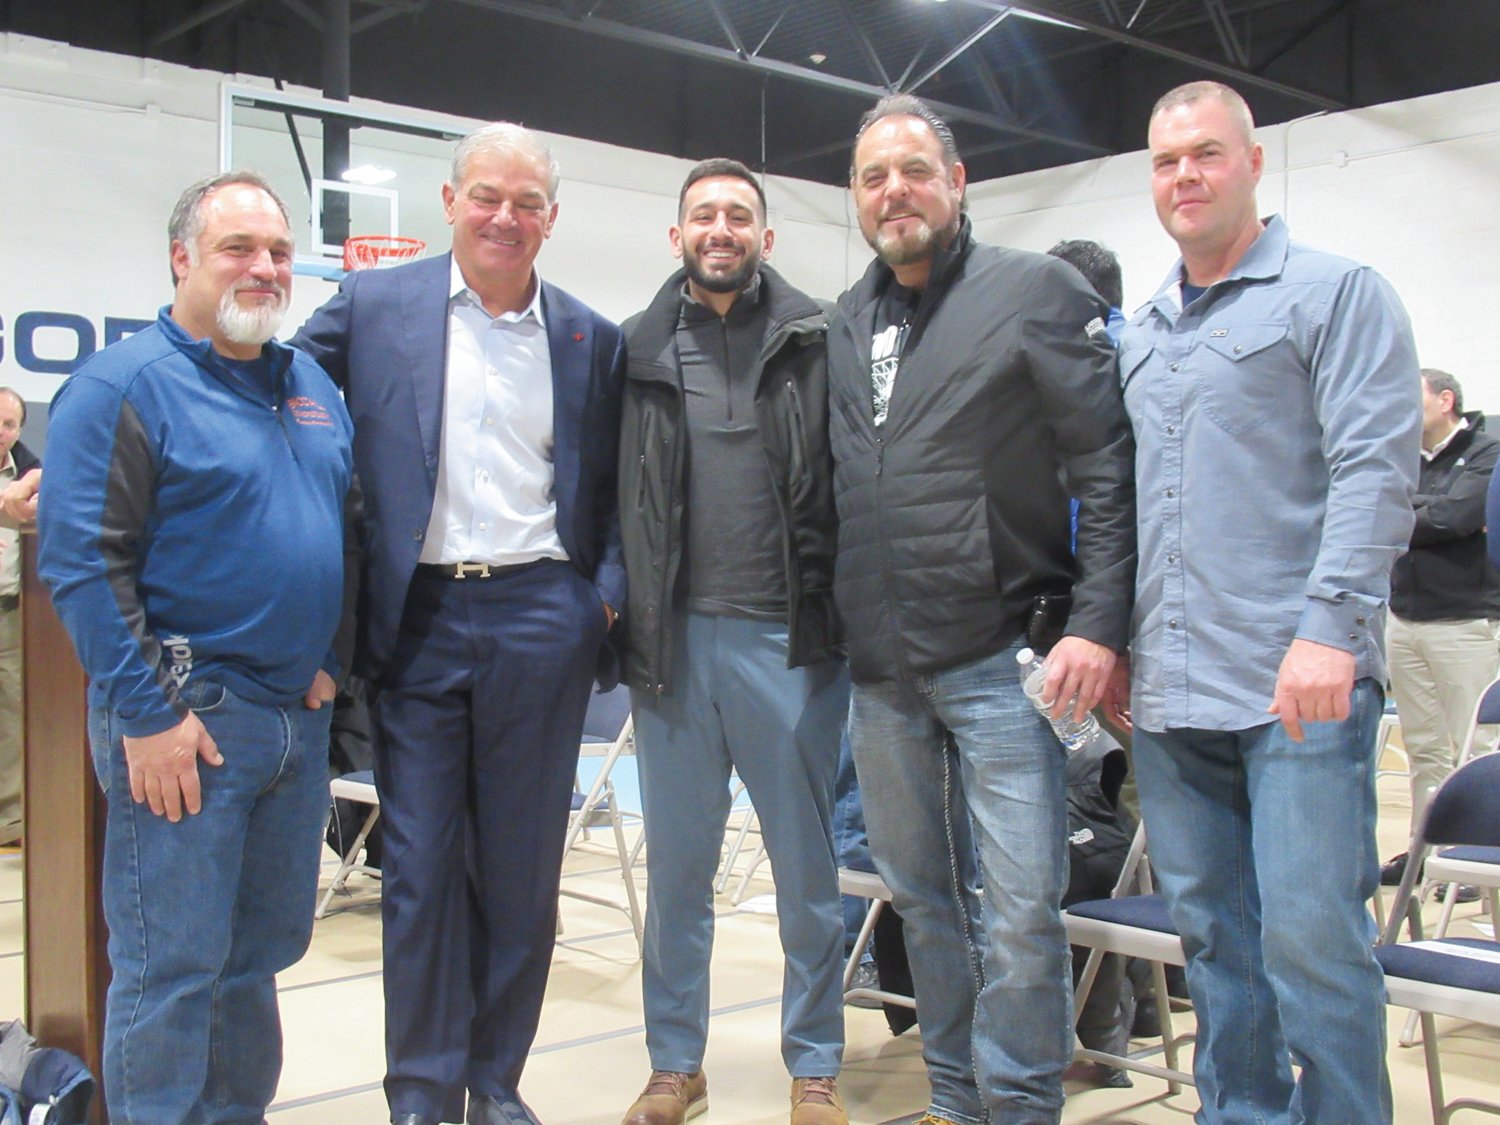 CLASSIC CONTRIBUTORS: Mayor-elect Joseph Polisena Jr. (center), whose idea it was to reinvent Rainone Gym, is joined by major donors Jay Baccala, Rico DiGregorio, Michael Sabitoni and Joseph Vinagro during Saturday’s special re-dedication ceremony.